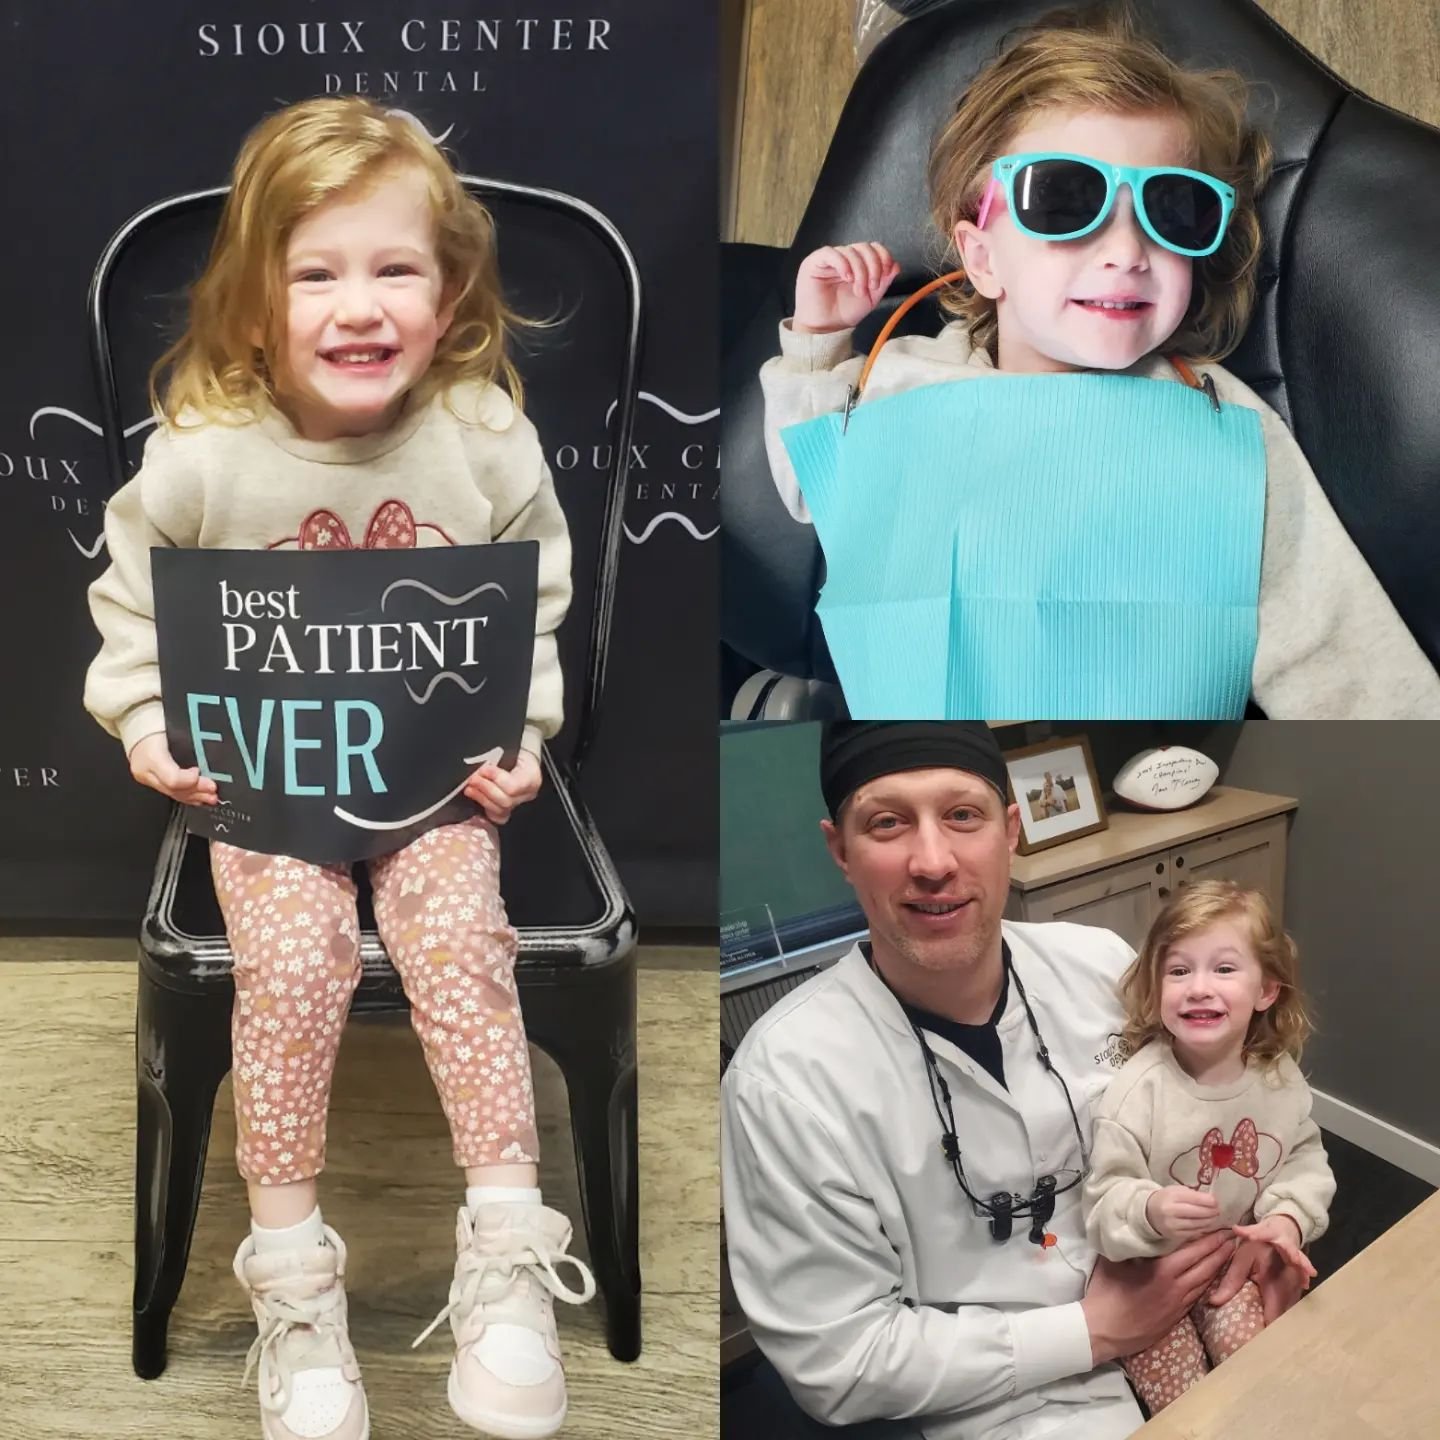 Dr. Kuiper had a very special visitor at the office today when his daughter Noa stopped by for a check-up! She was so brave and loved getting a new toothbrush ❤️🪥😁